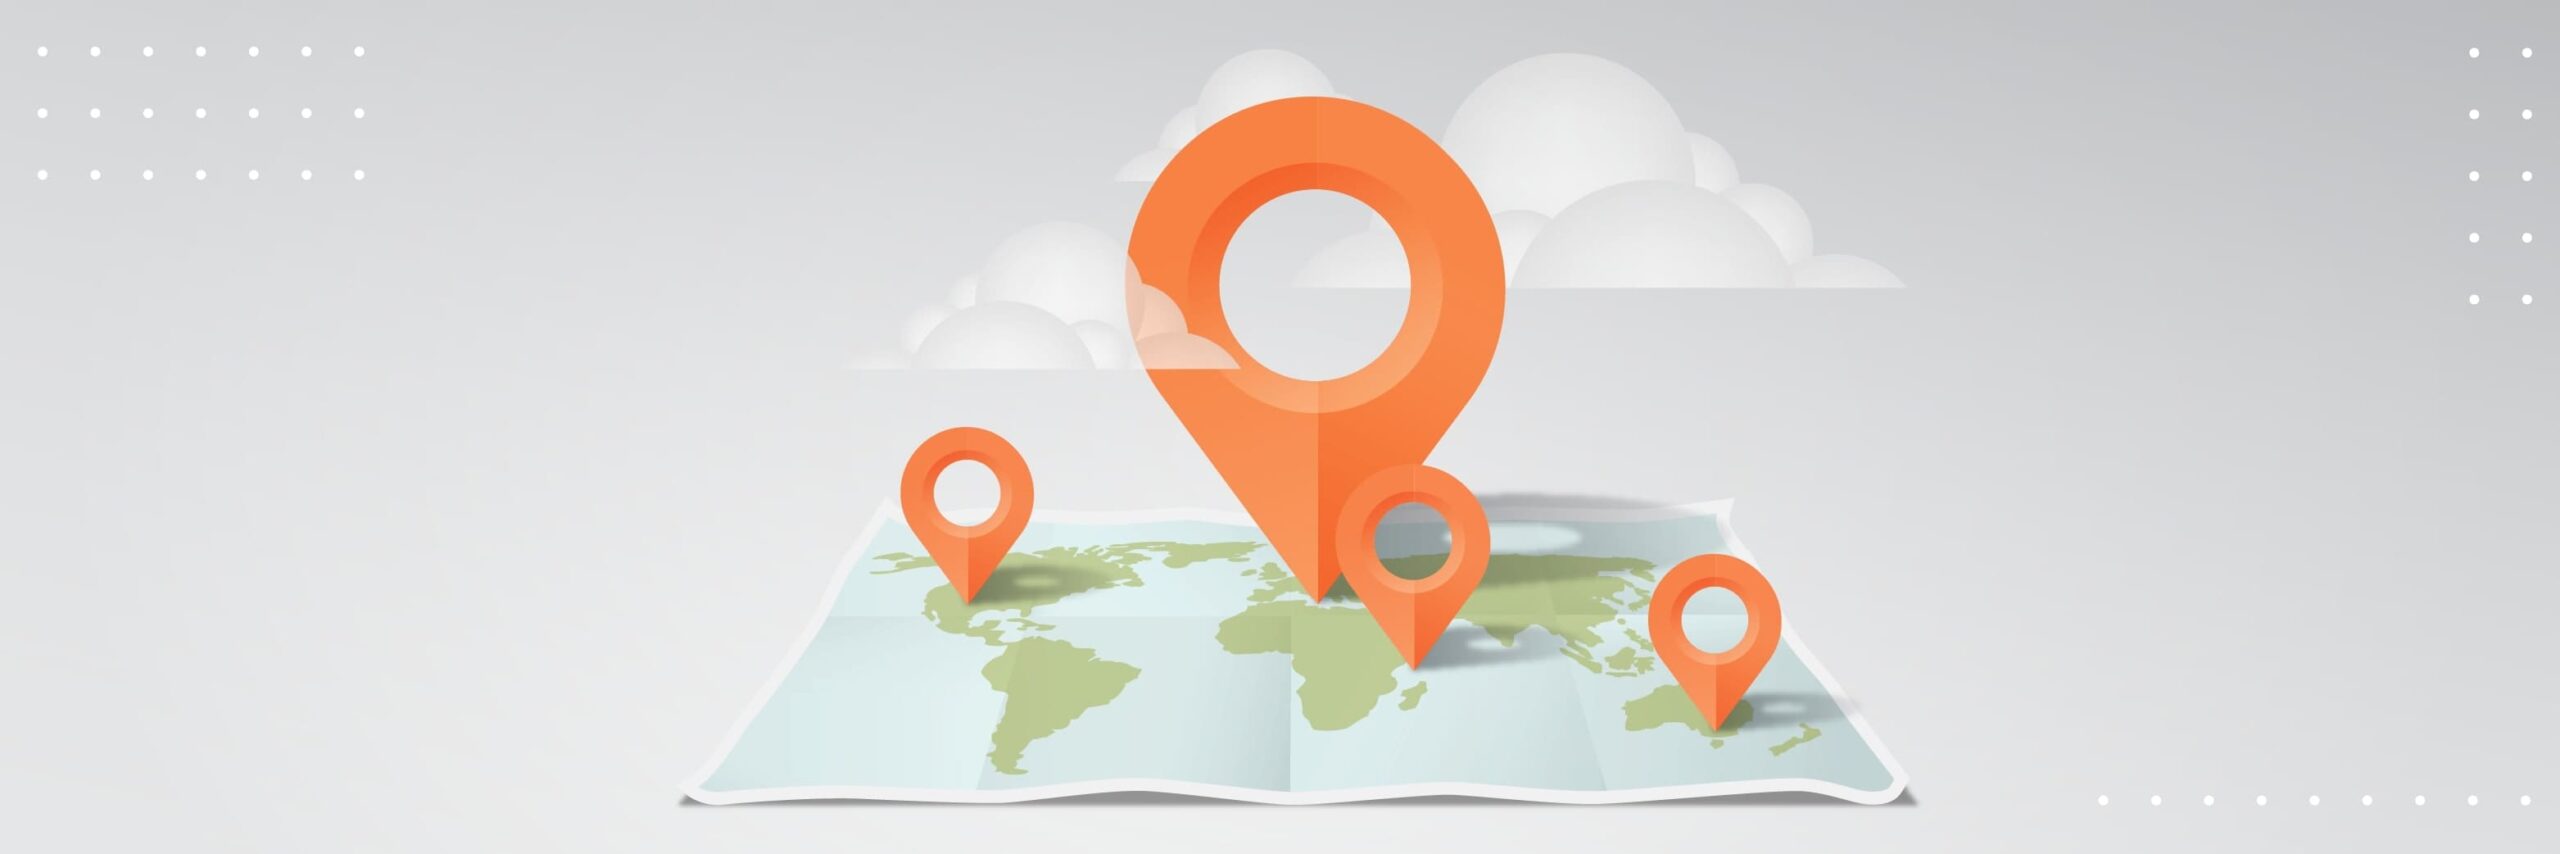 How to Create a Location-based App and Enter the Market